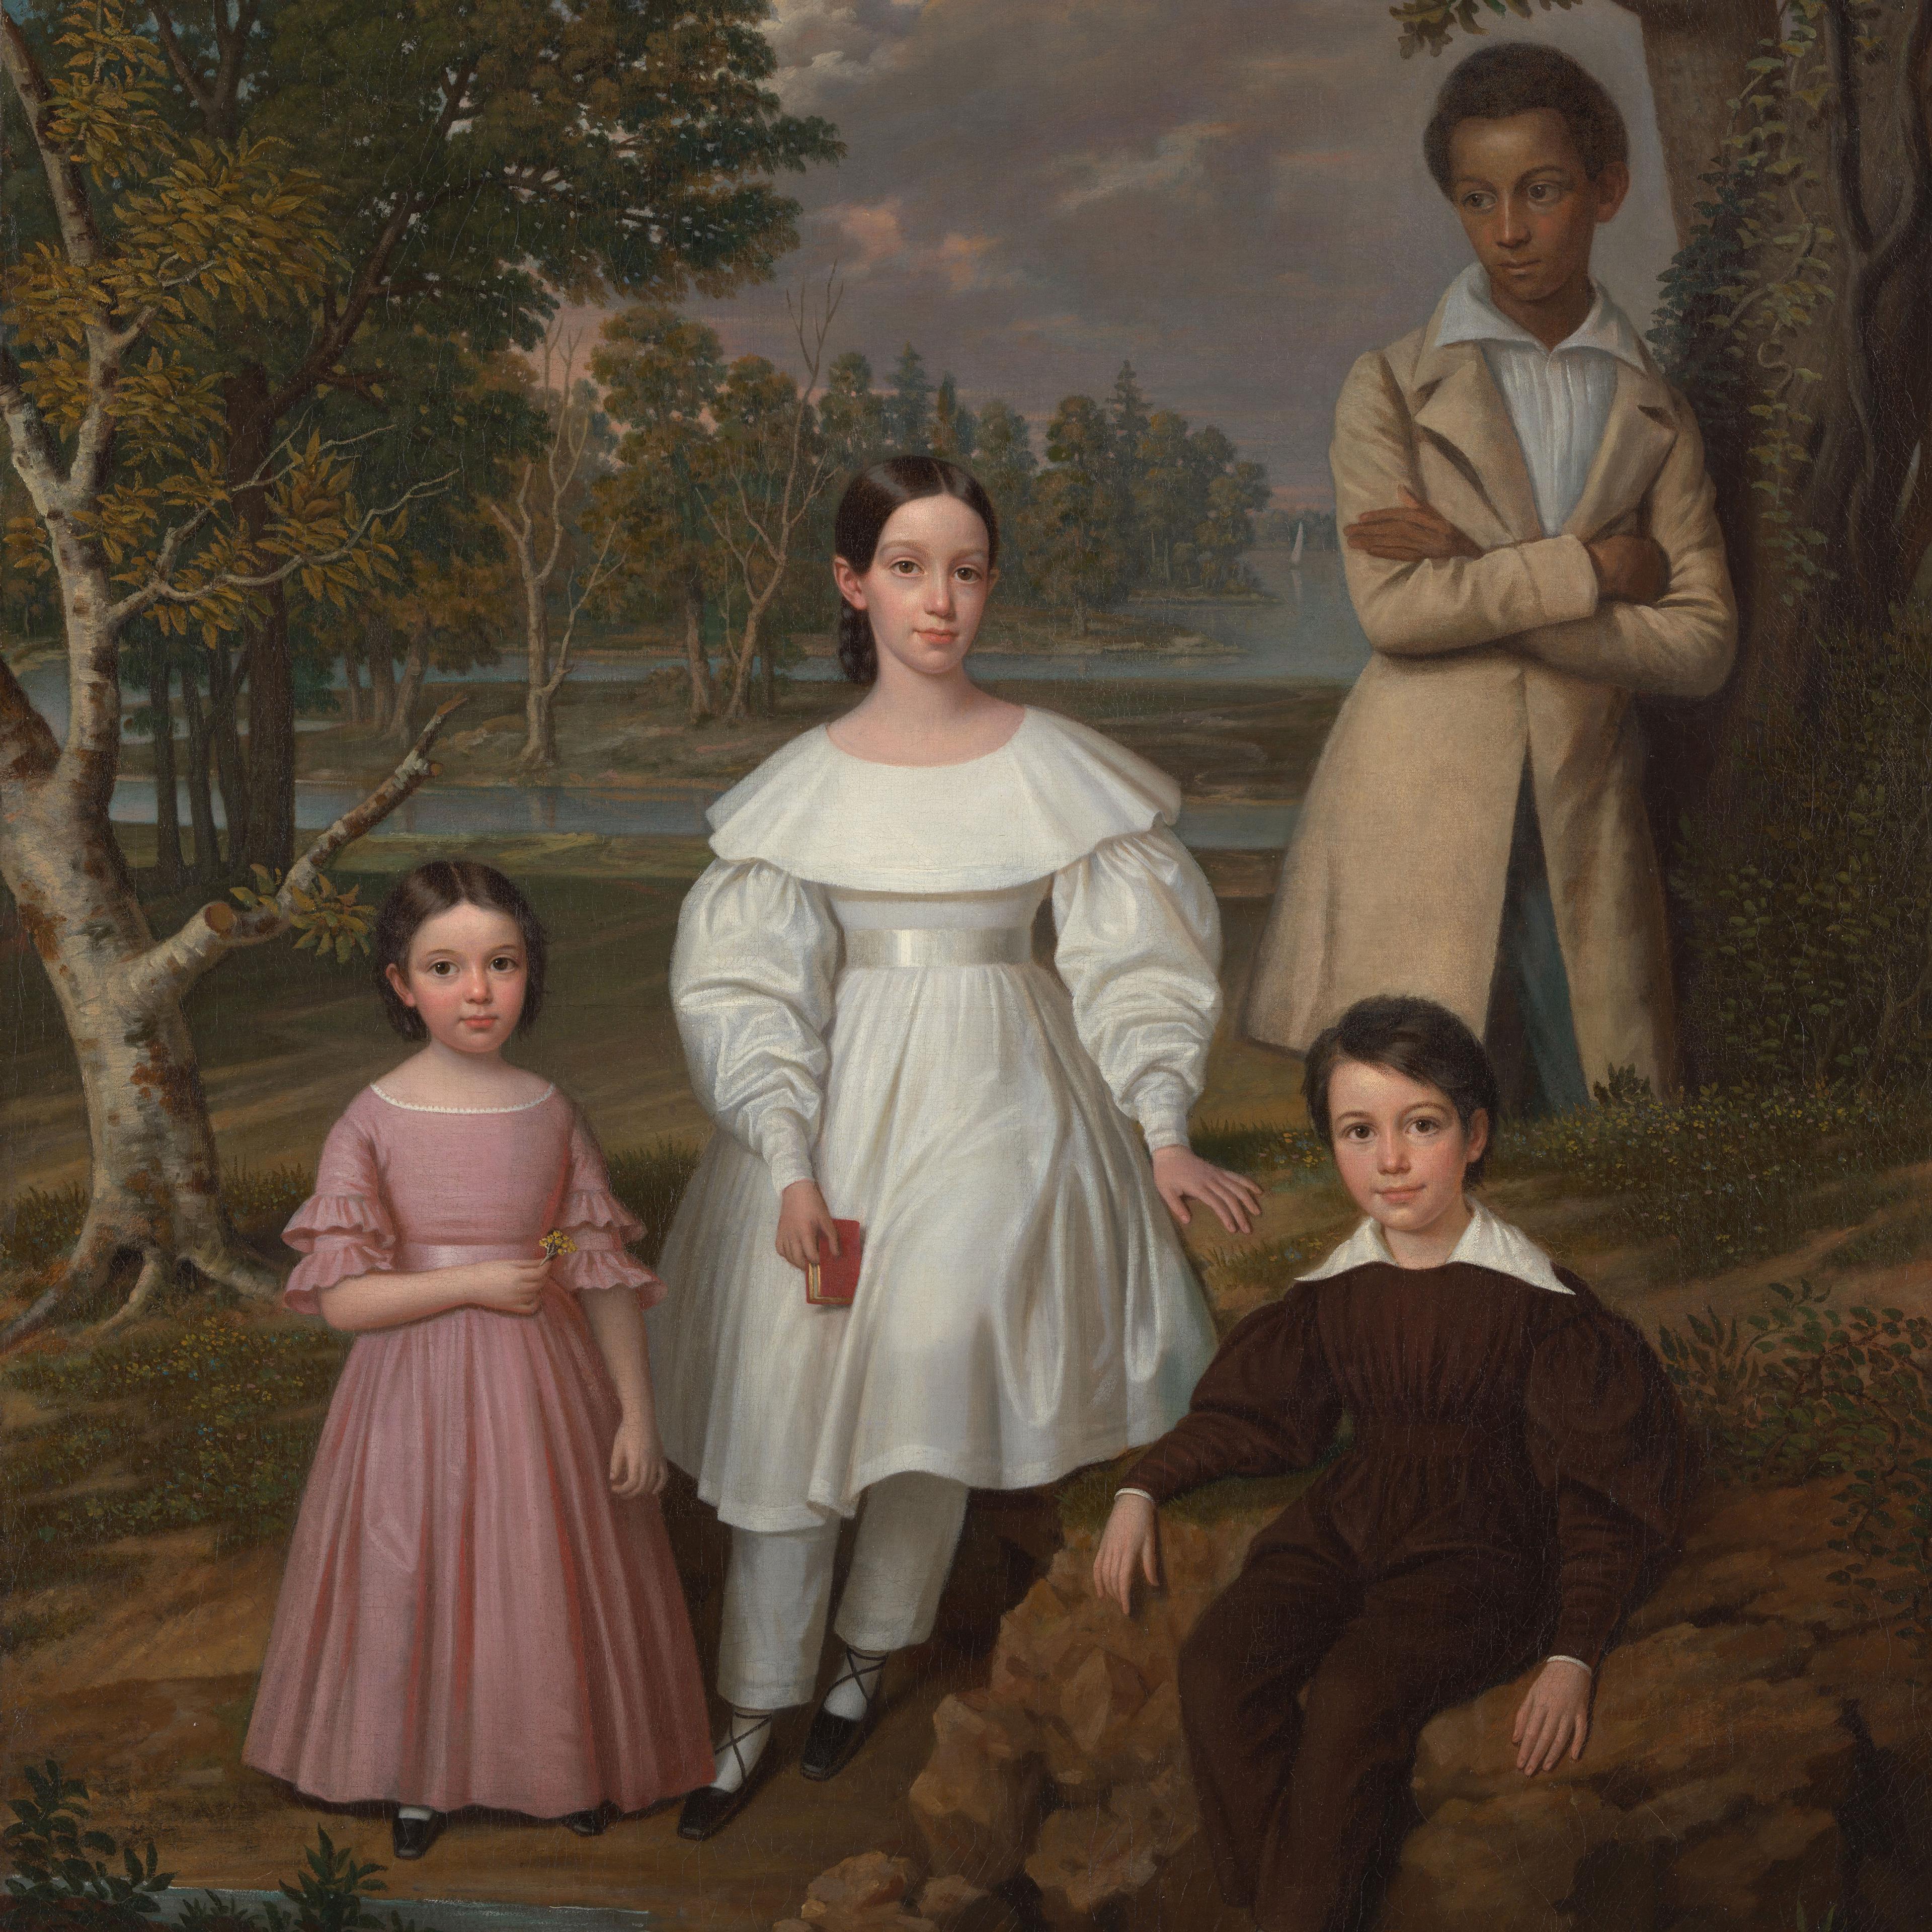 Portrait of a Black teenage boy and three white children positioned against a Louisiana landscape.